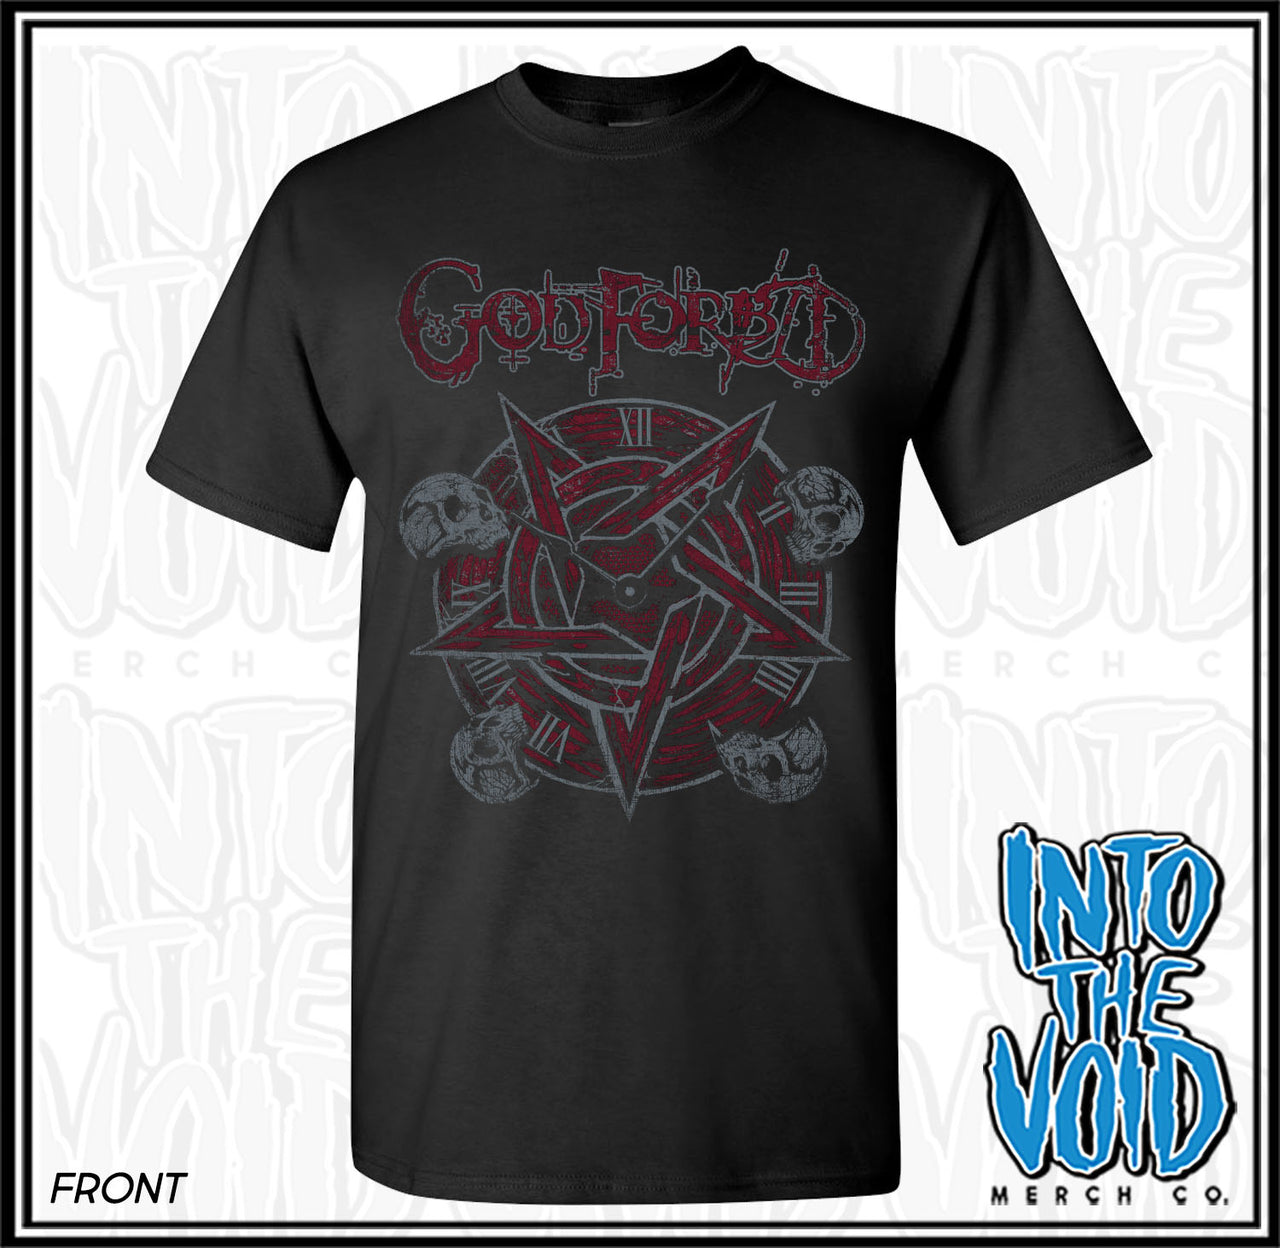 GOD FORBID - BLOOD IN THE WATER - Short Sleeve T-Shirt